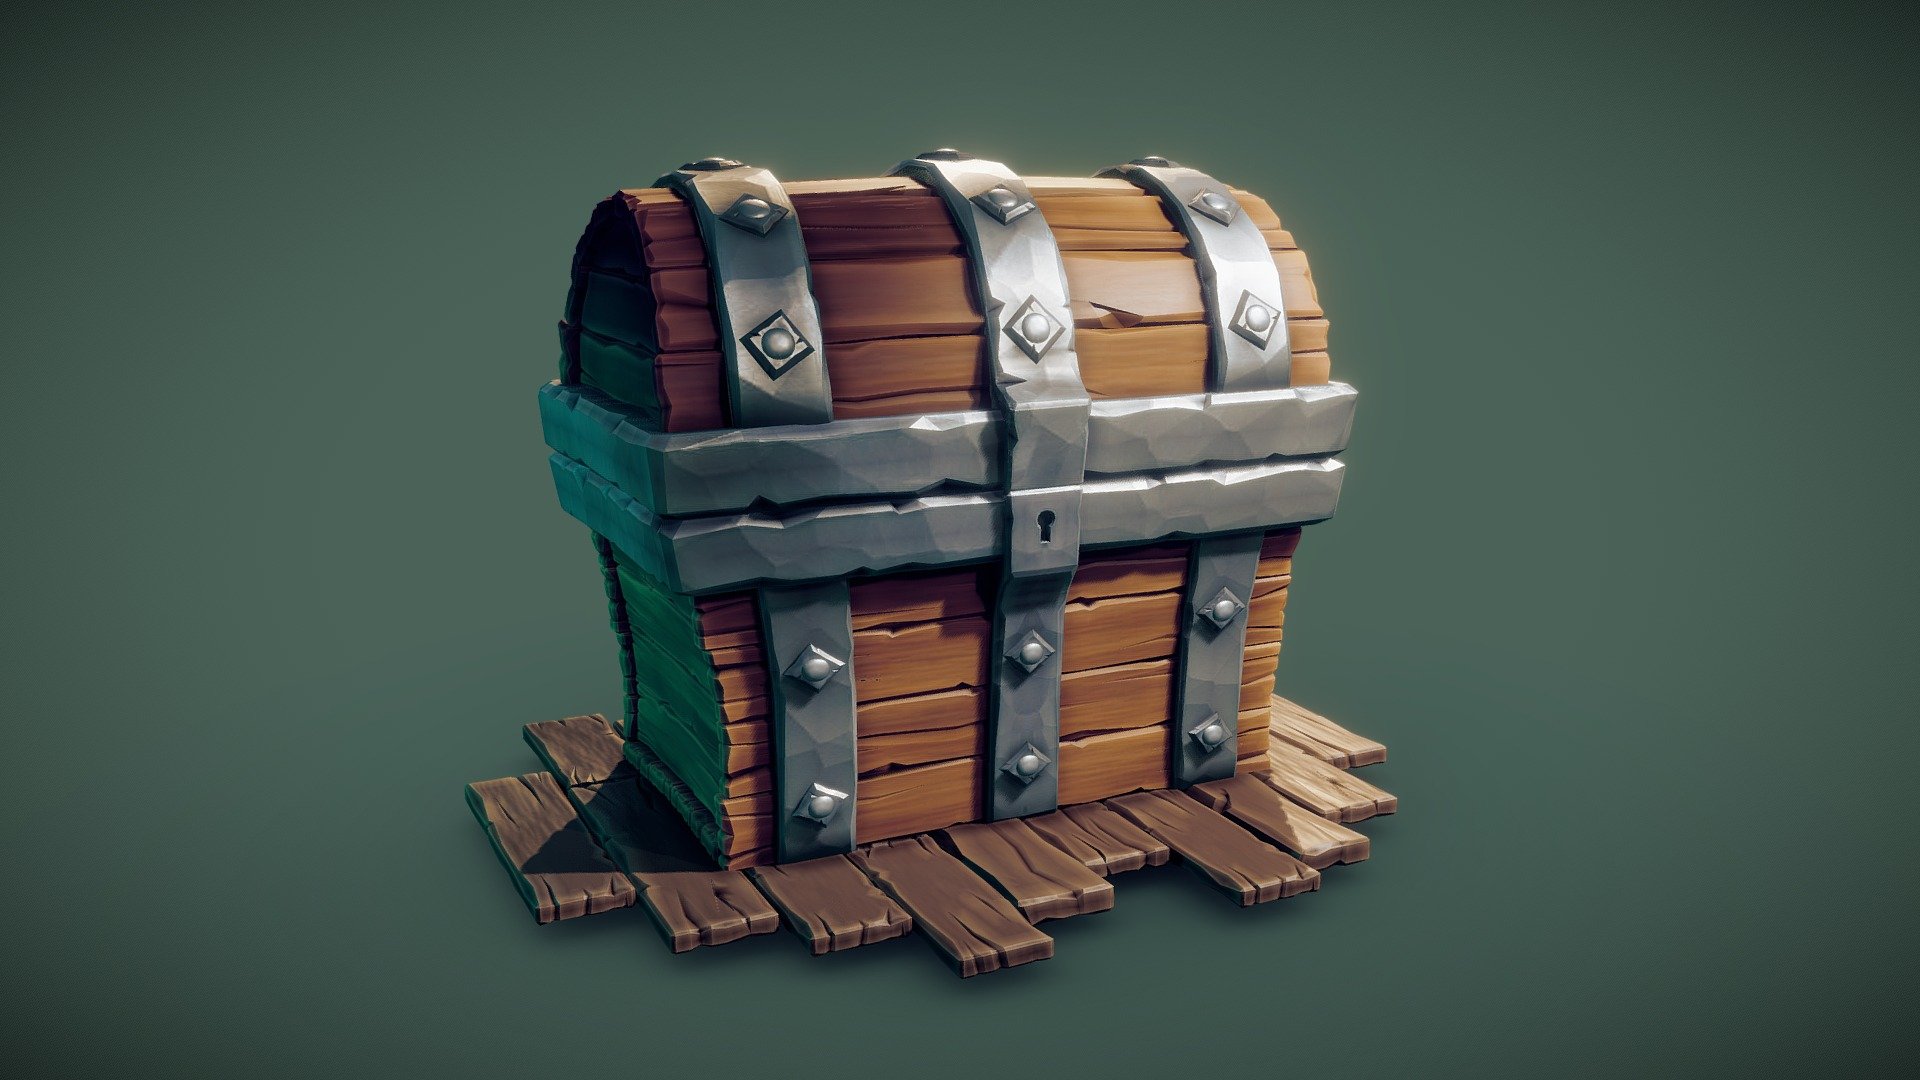 Stylised Treasure Chest asset with the ability to open and close the lid. 

27k Tris (excluding the floor). 

Blender scene and FBX include 3 Meshes: 
x1 Chest Lid (with working pivot)
x1 Chest Base
x1 Floor
Textures also included.

A learning project aimed at familiarising myself with Blender 2.8
This is my take on &lsquo;the' treasure chest guide to Blender by CGCookie. It was a process whereby I started from scratch and learned how to model, unwrap and texture, as well as render within Blender. It was a very insightful process and super impressed with Blender as a tool. I hope this model can be of used to folks:) - Stylised Treasure Chest - Buy Royalty Free 3D model by Hammer (@jackhammer) 3d model